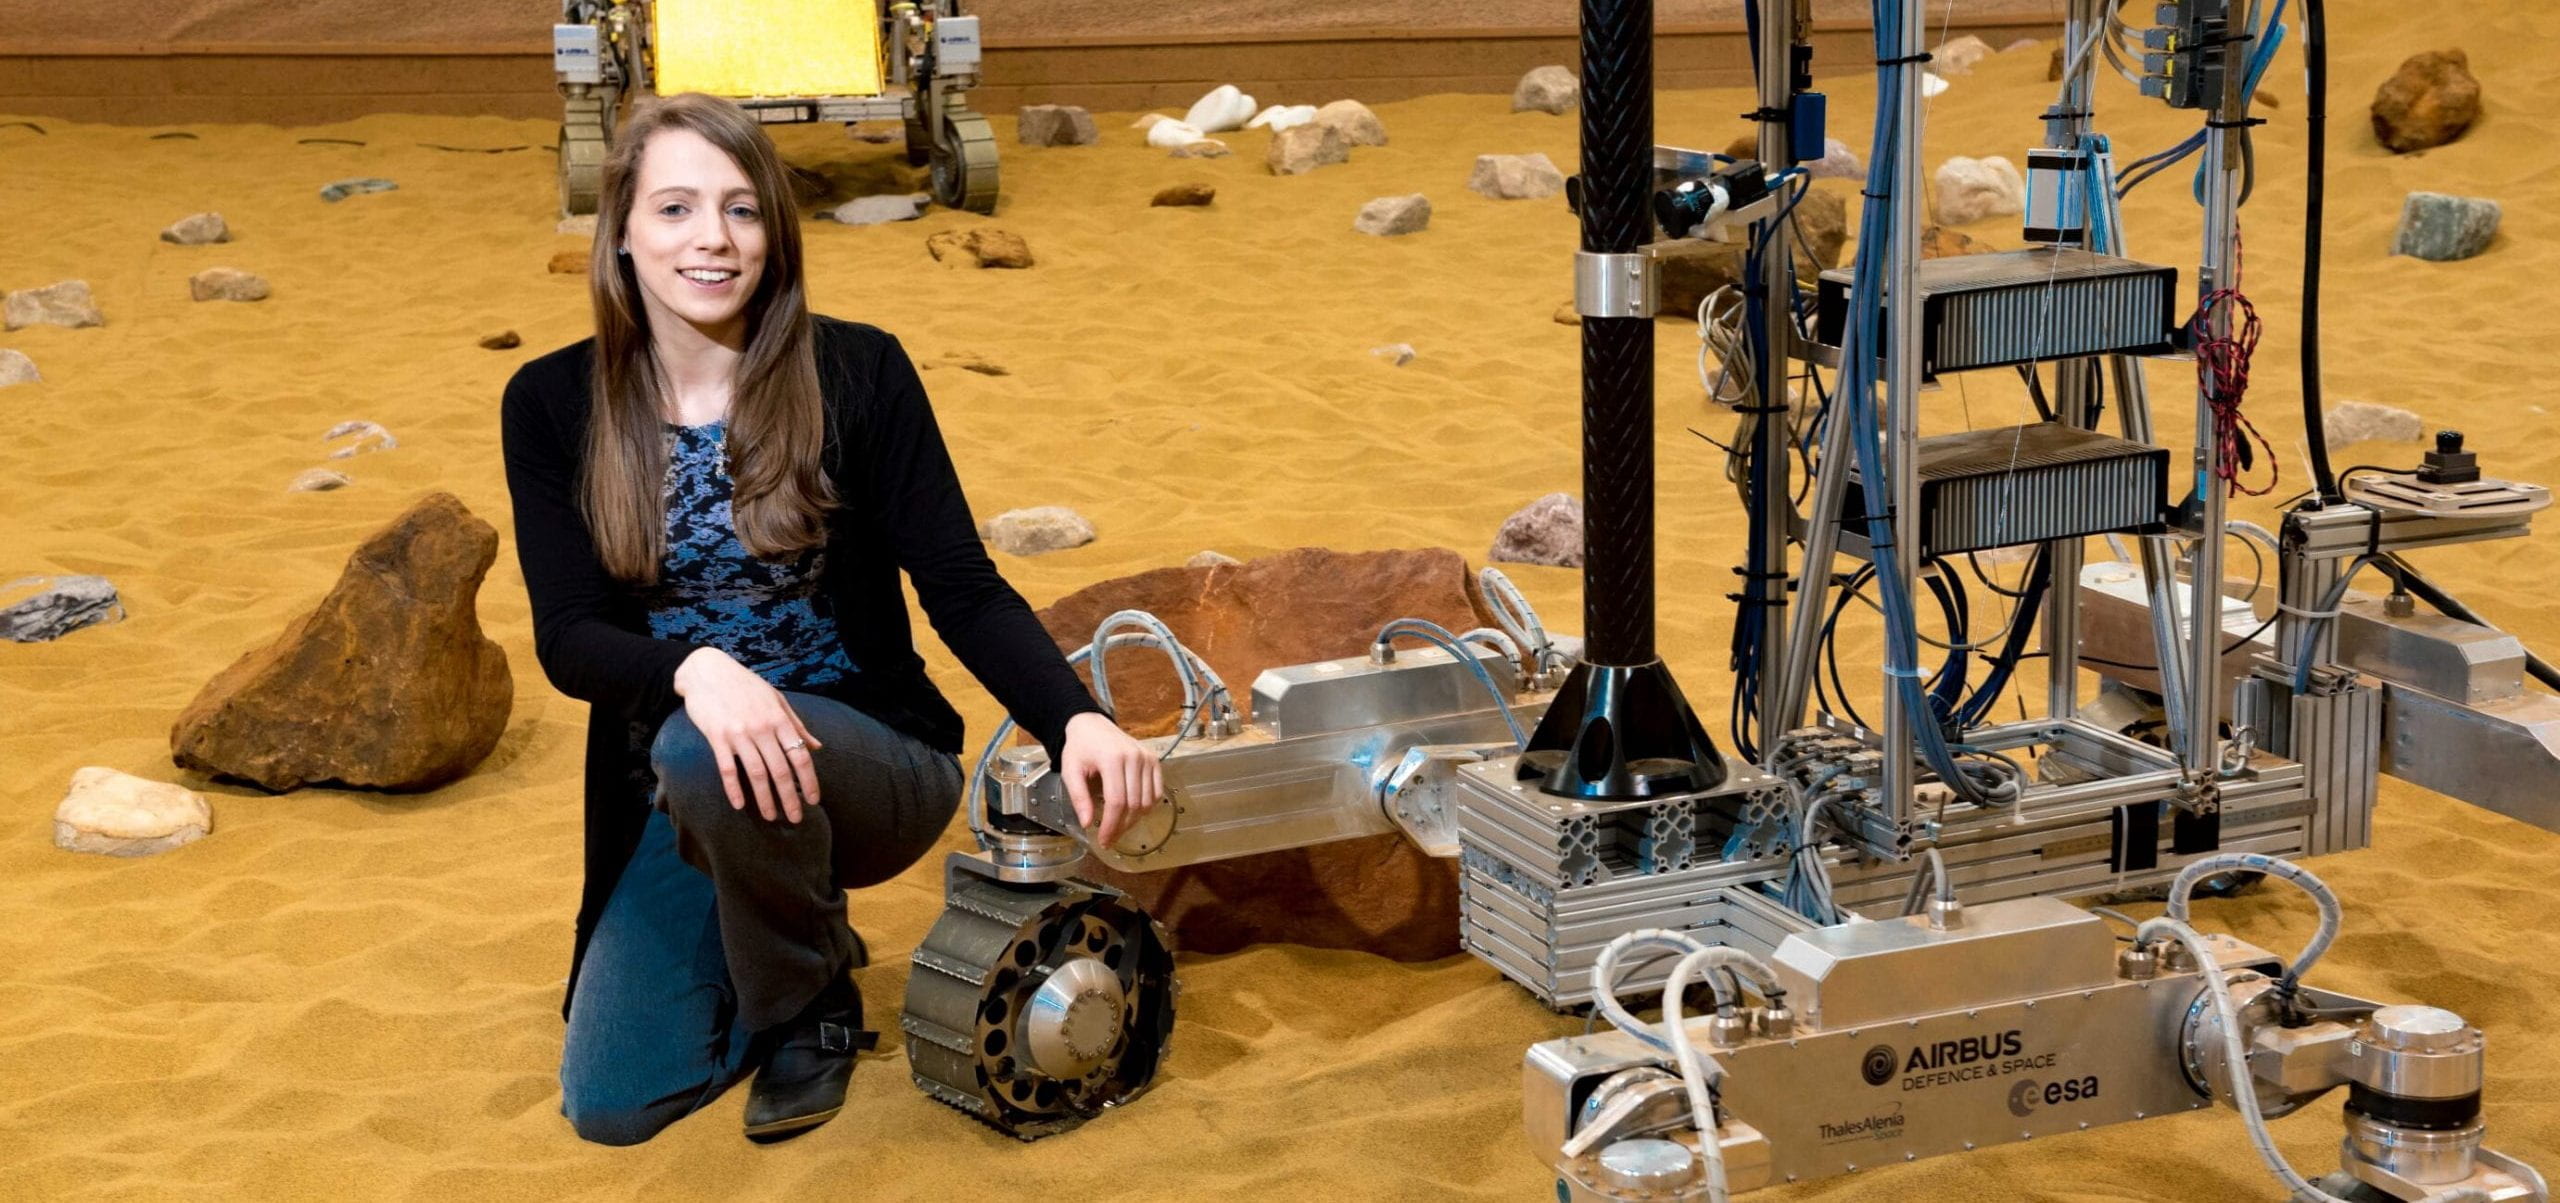 Kat Styles working on the ExoMars rover at Airbus